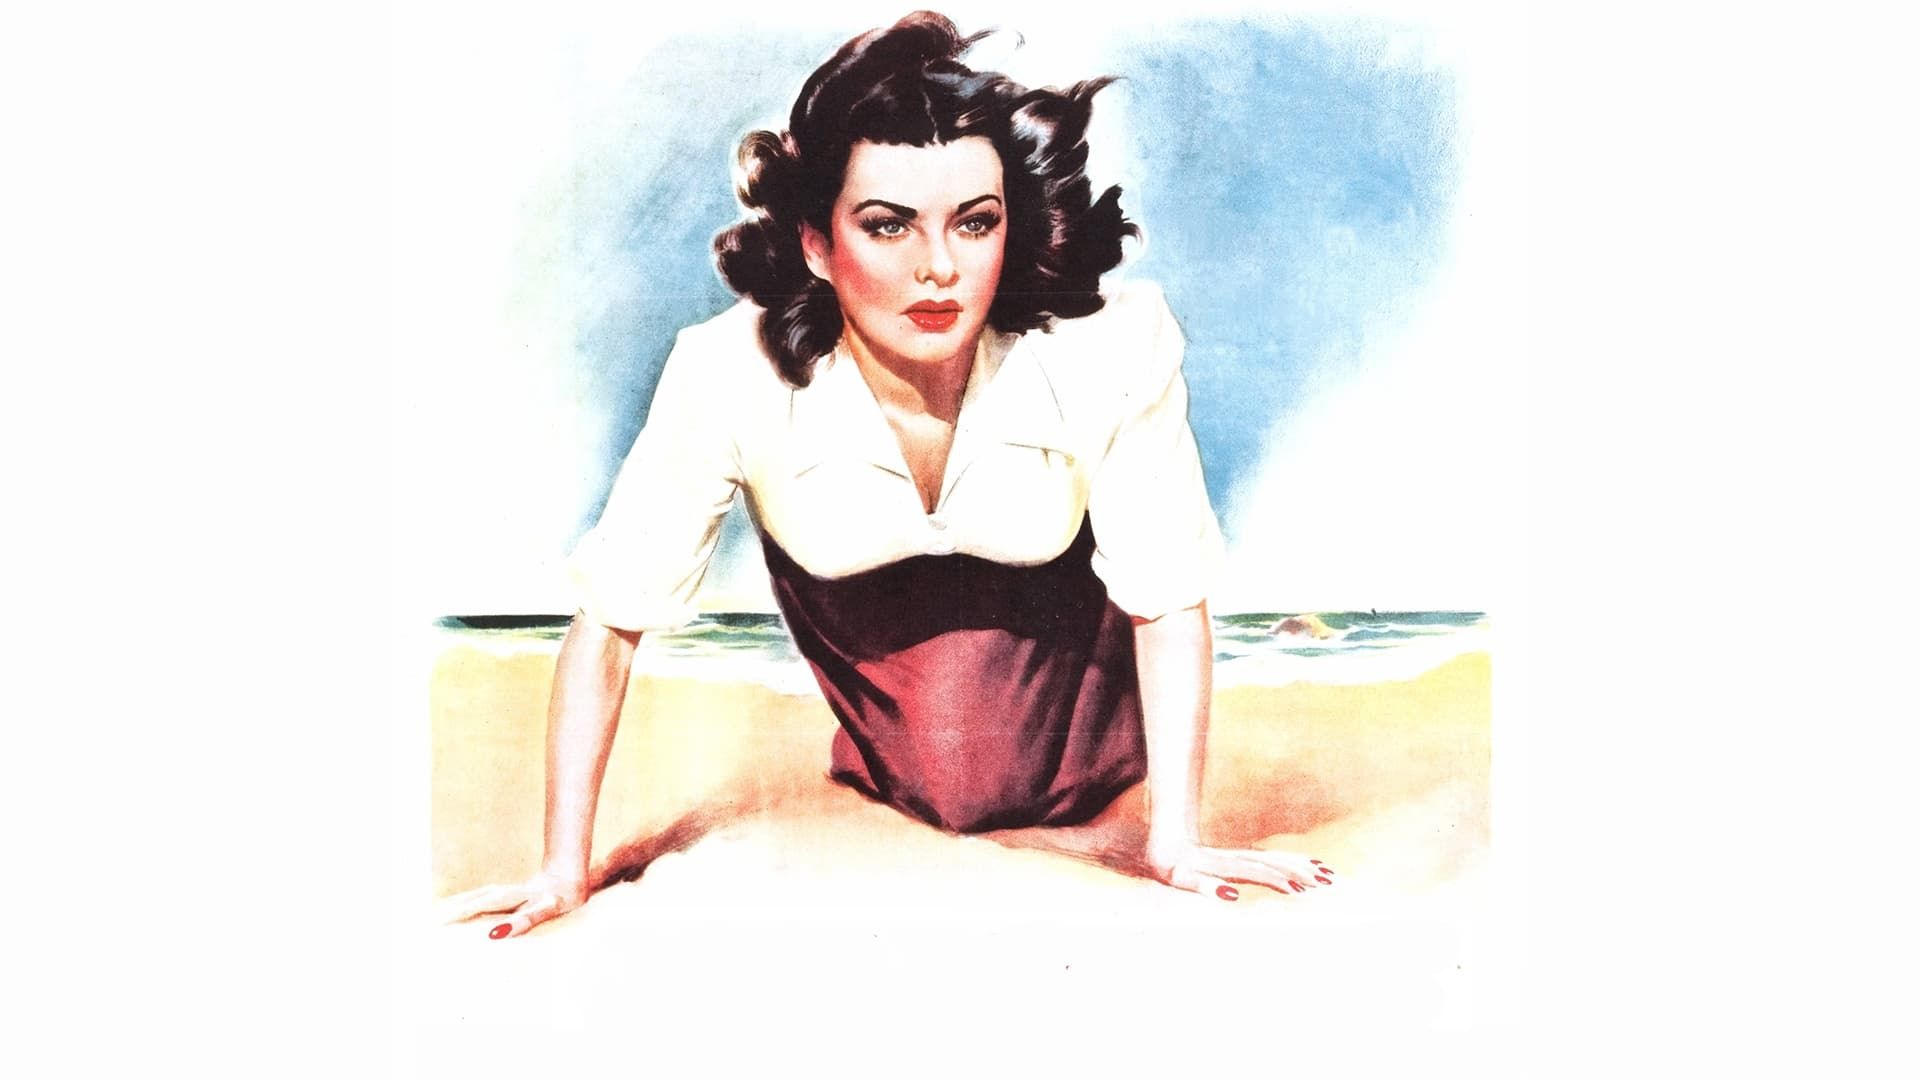 The Woman on the Beach background